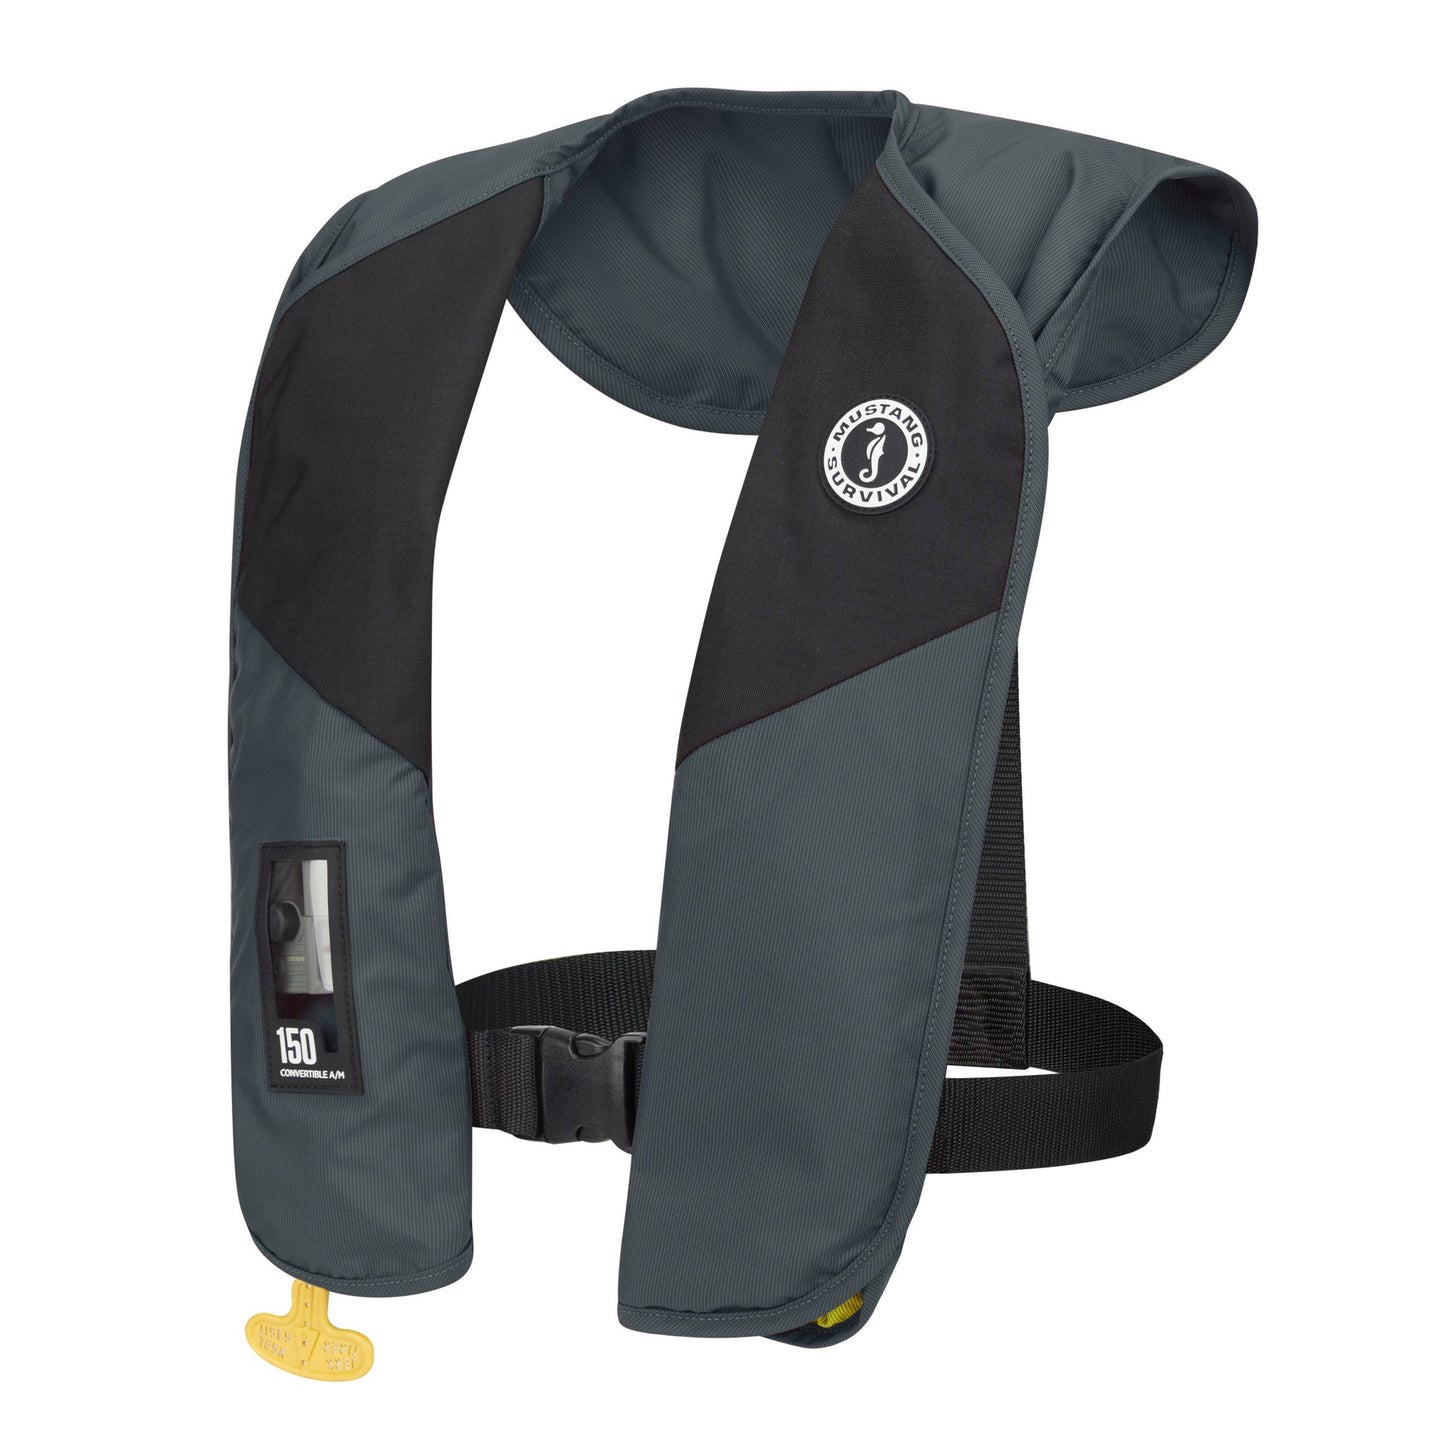 Mustang Survival MIT 150 Convertible A/M Inflatable PFD (IN STORE Pick Up Only)